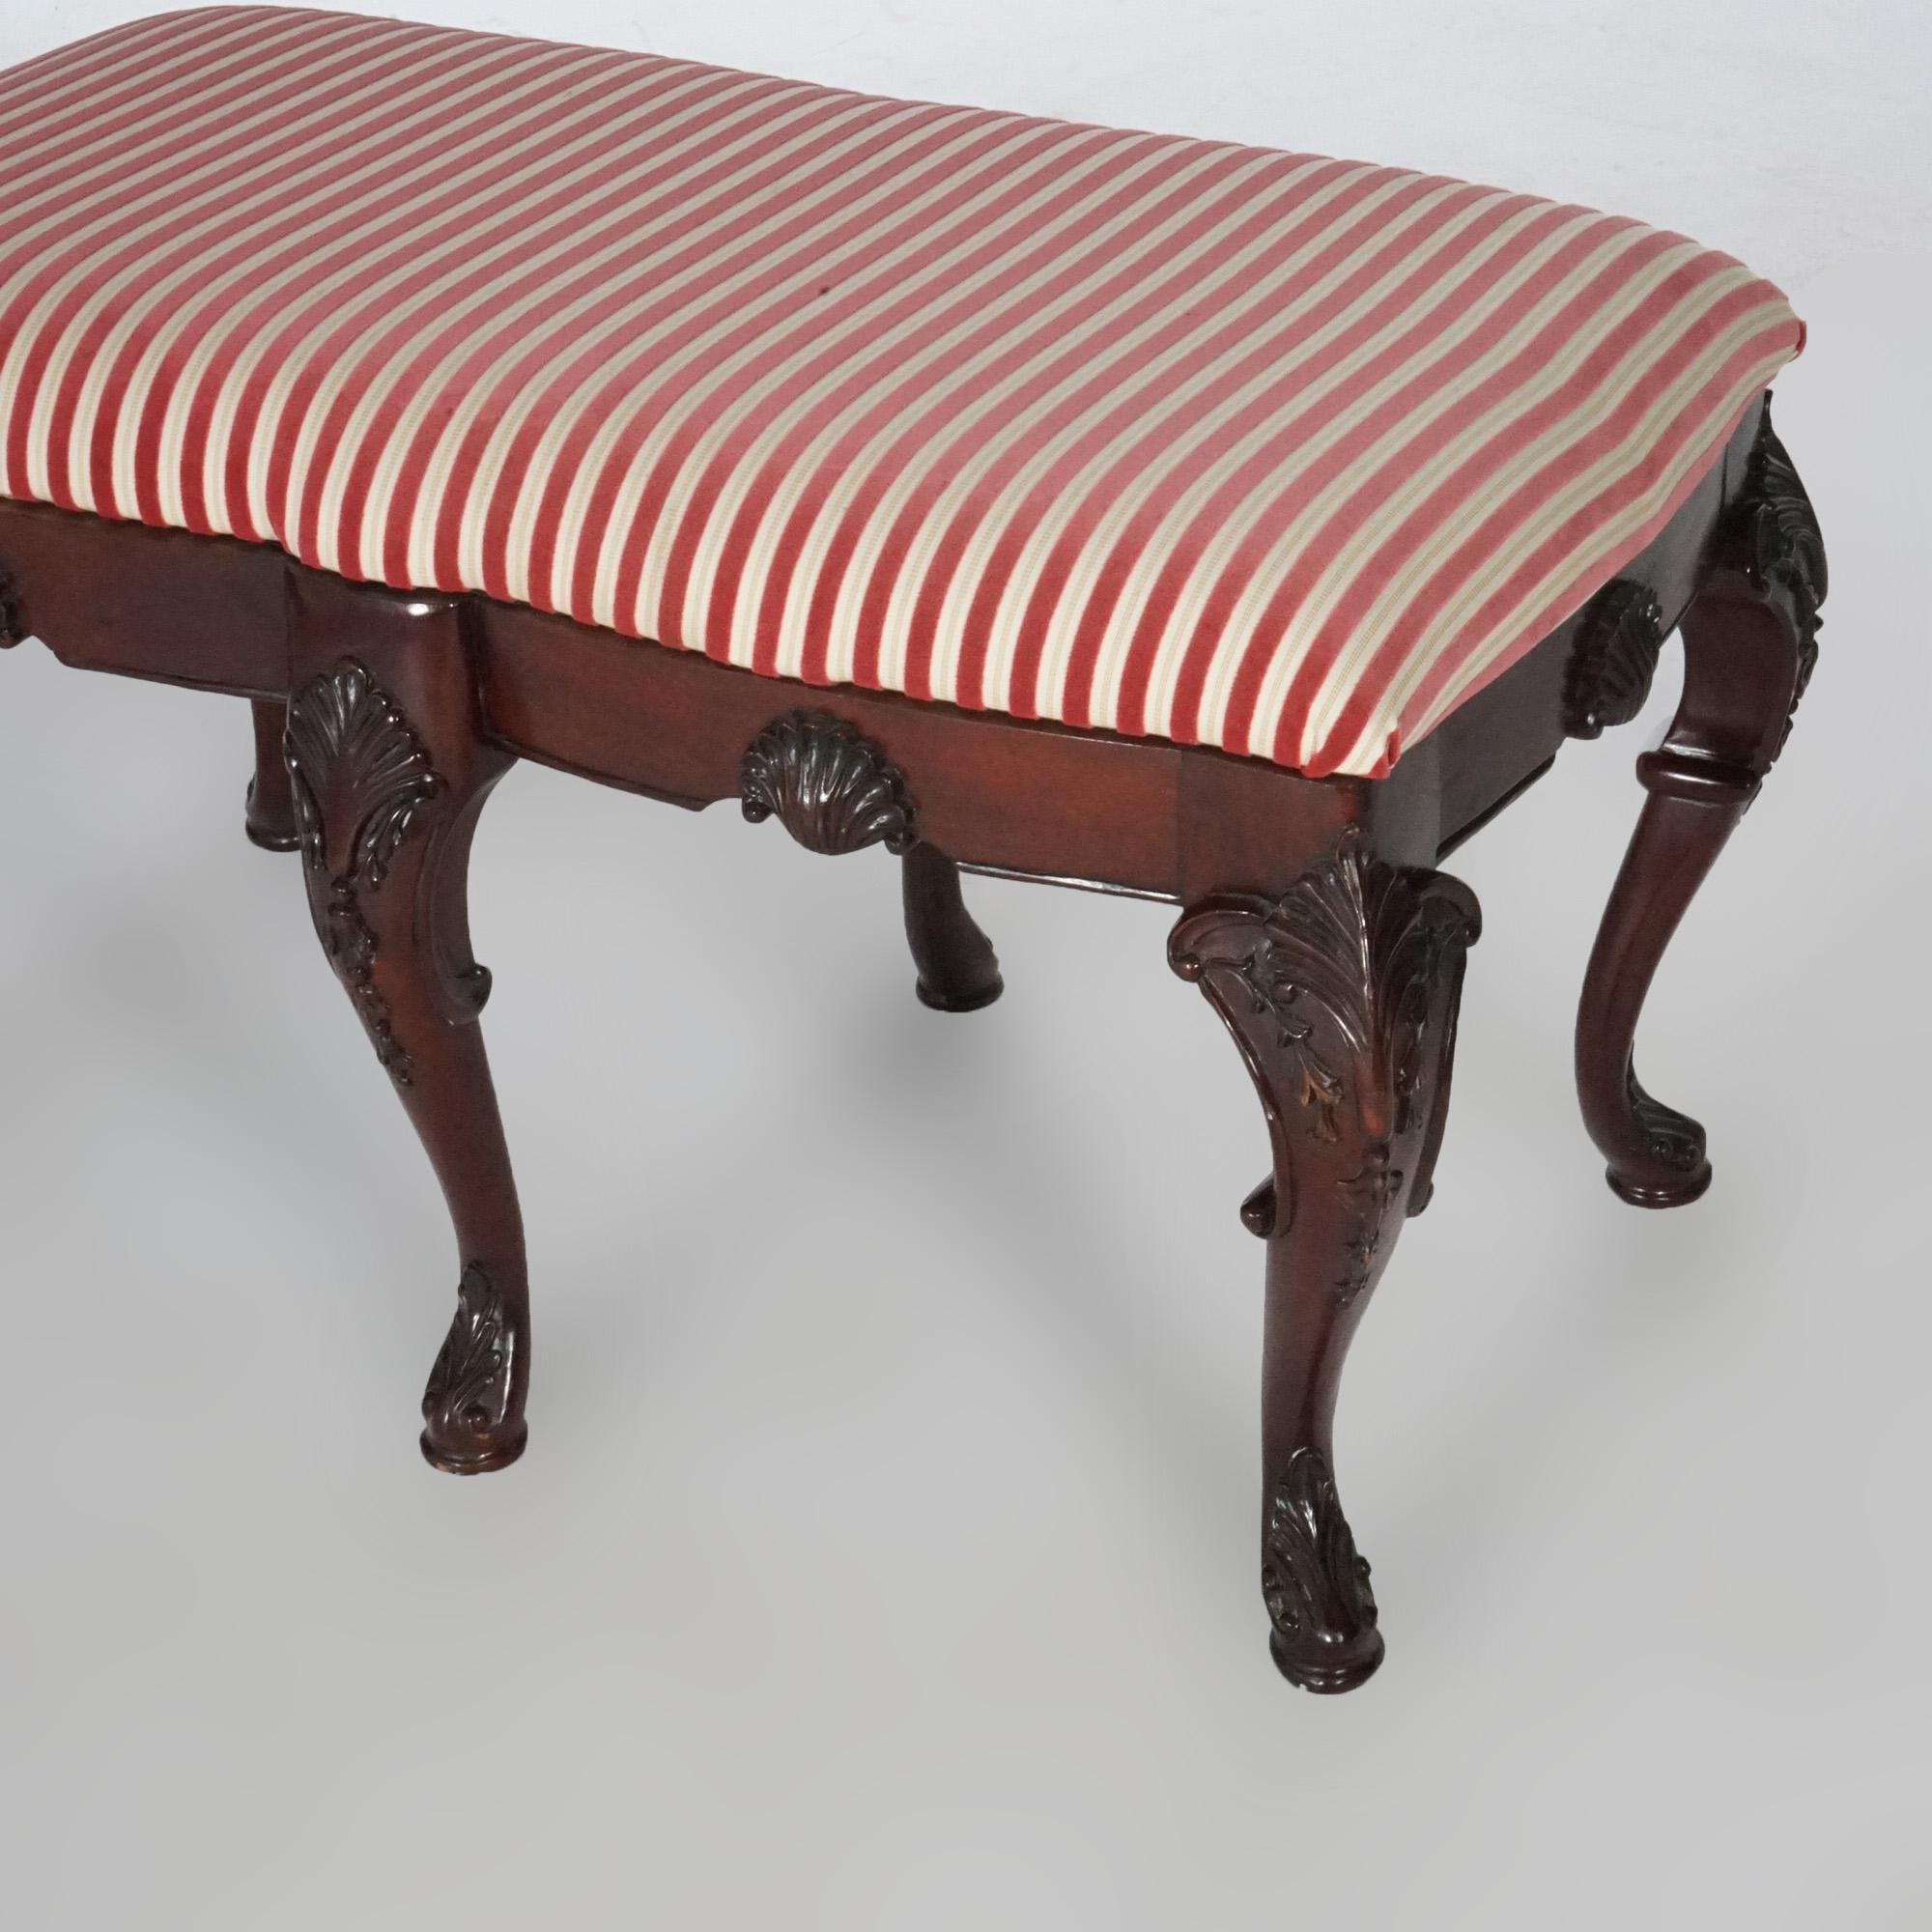 French Style Carved Mahogany Upholstered Long Bench 20th Century For Sale 3